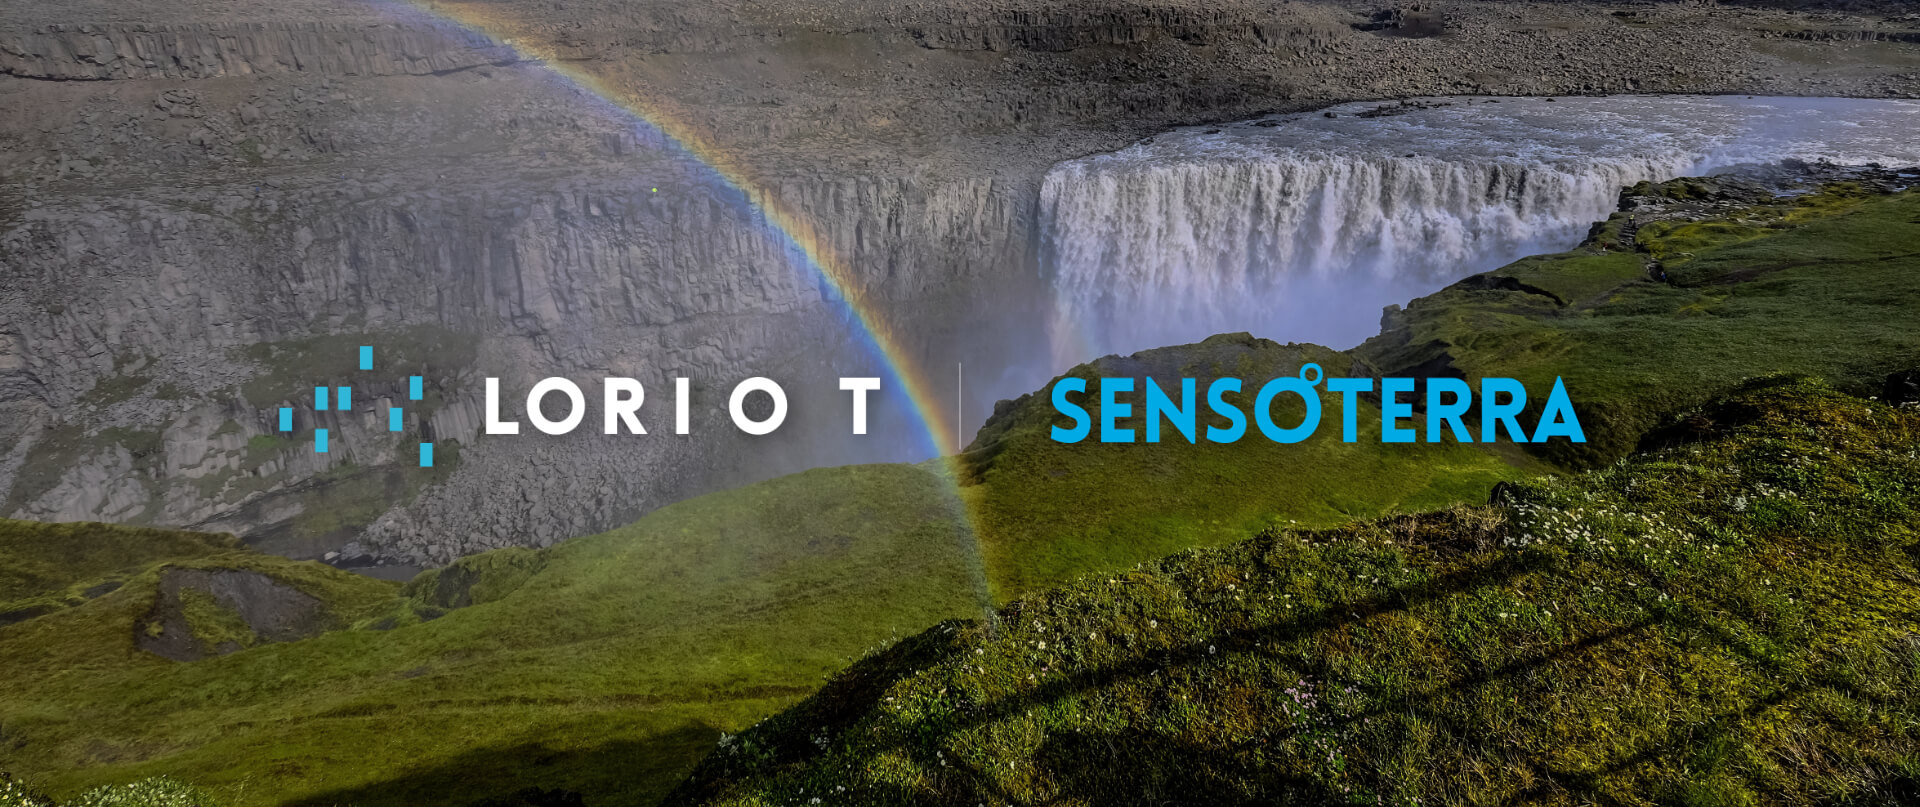 Sensoterra and LORIOT partner to provide out-of-the-box connectivity to the global LORIOT LoRaWAN® network.